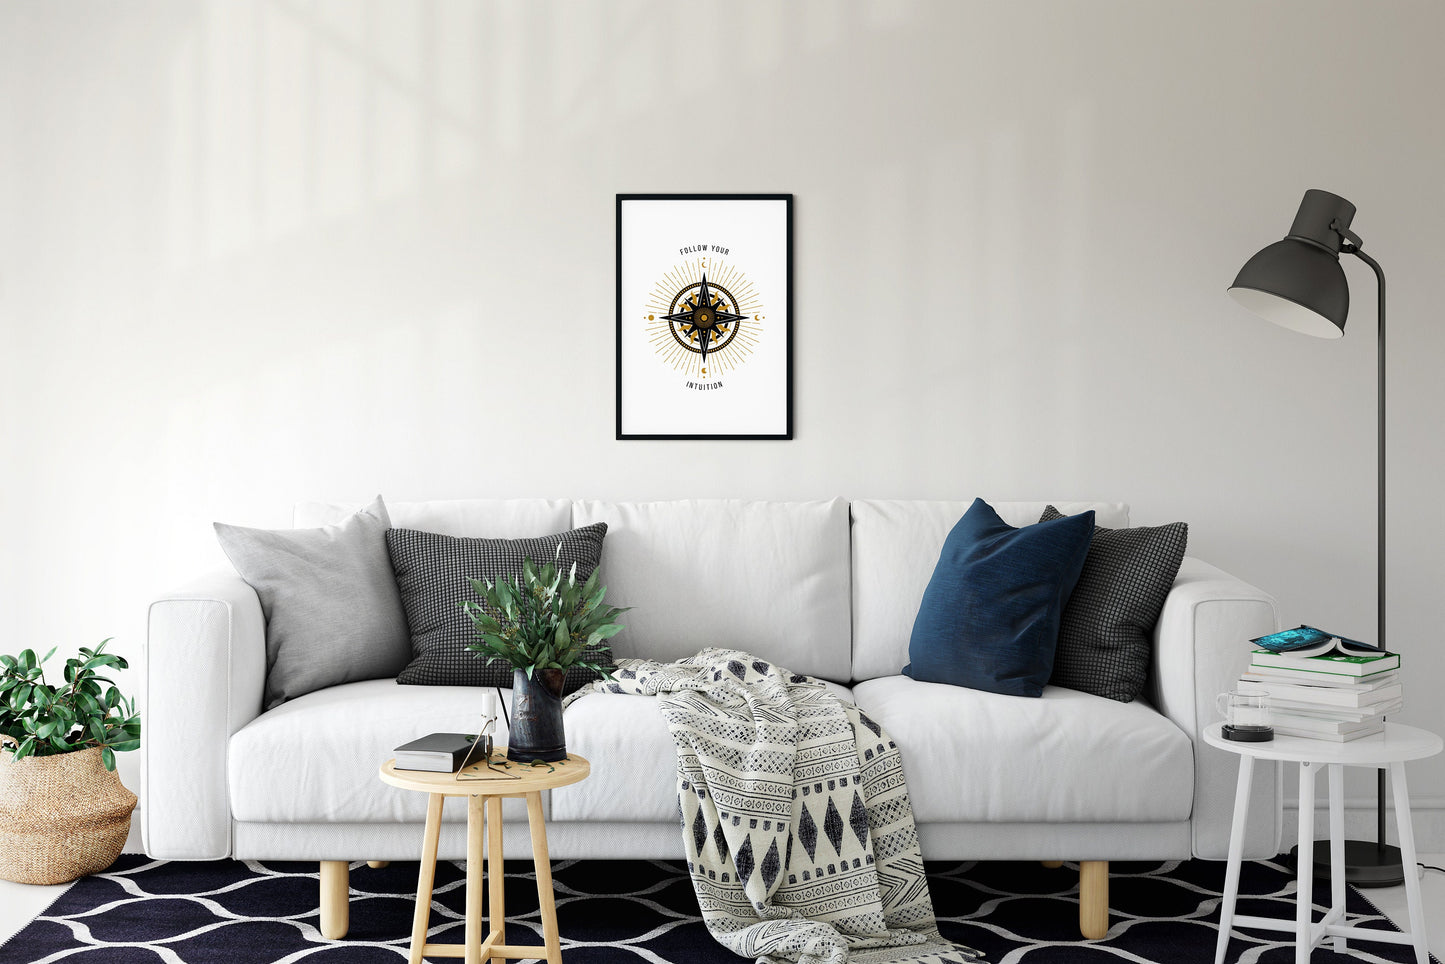 Follow your intuition Poster, Kompass Poster, inspirierendes Zitat Poster, Boho Poster, Folge deiner Intuition